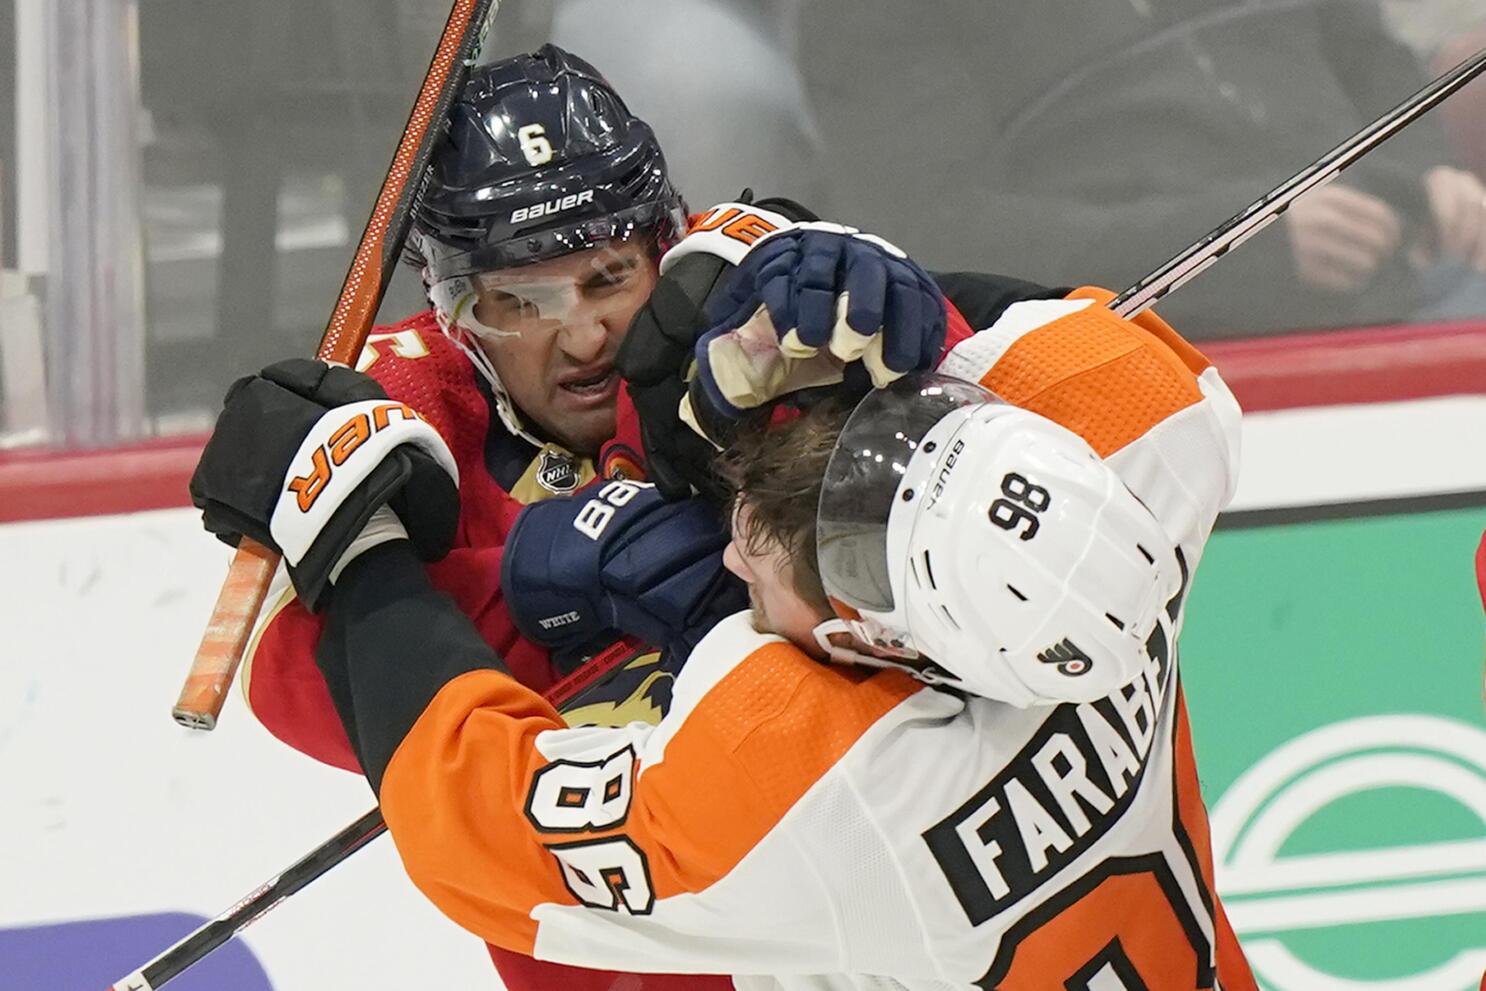 Farabee, Hart lead surprising Flyers to 4-3 win vs Panthers